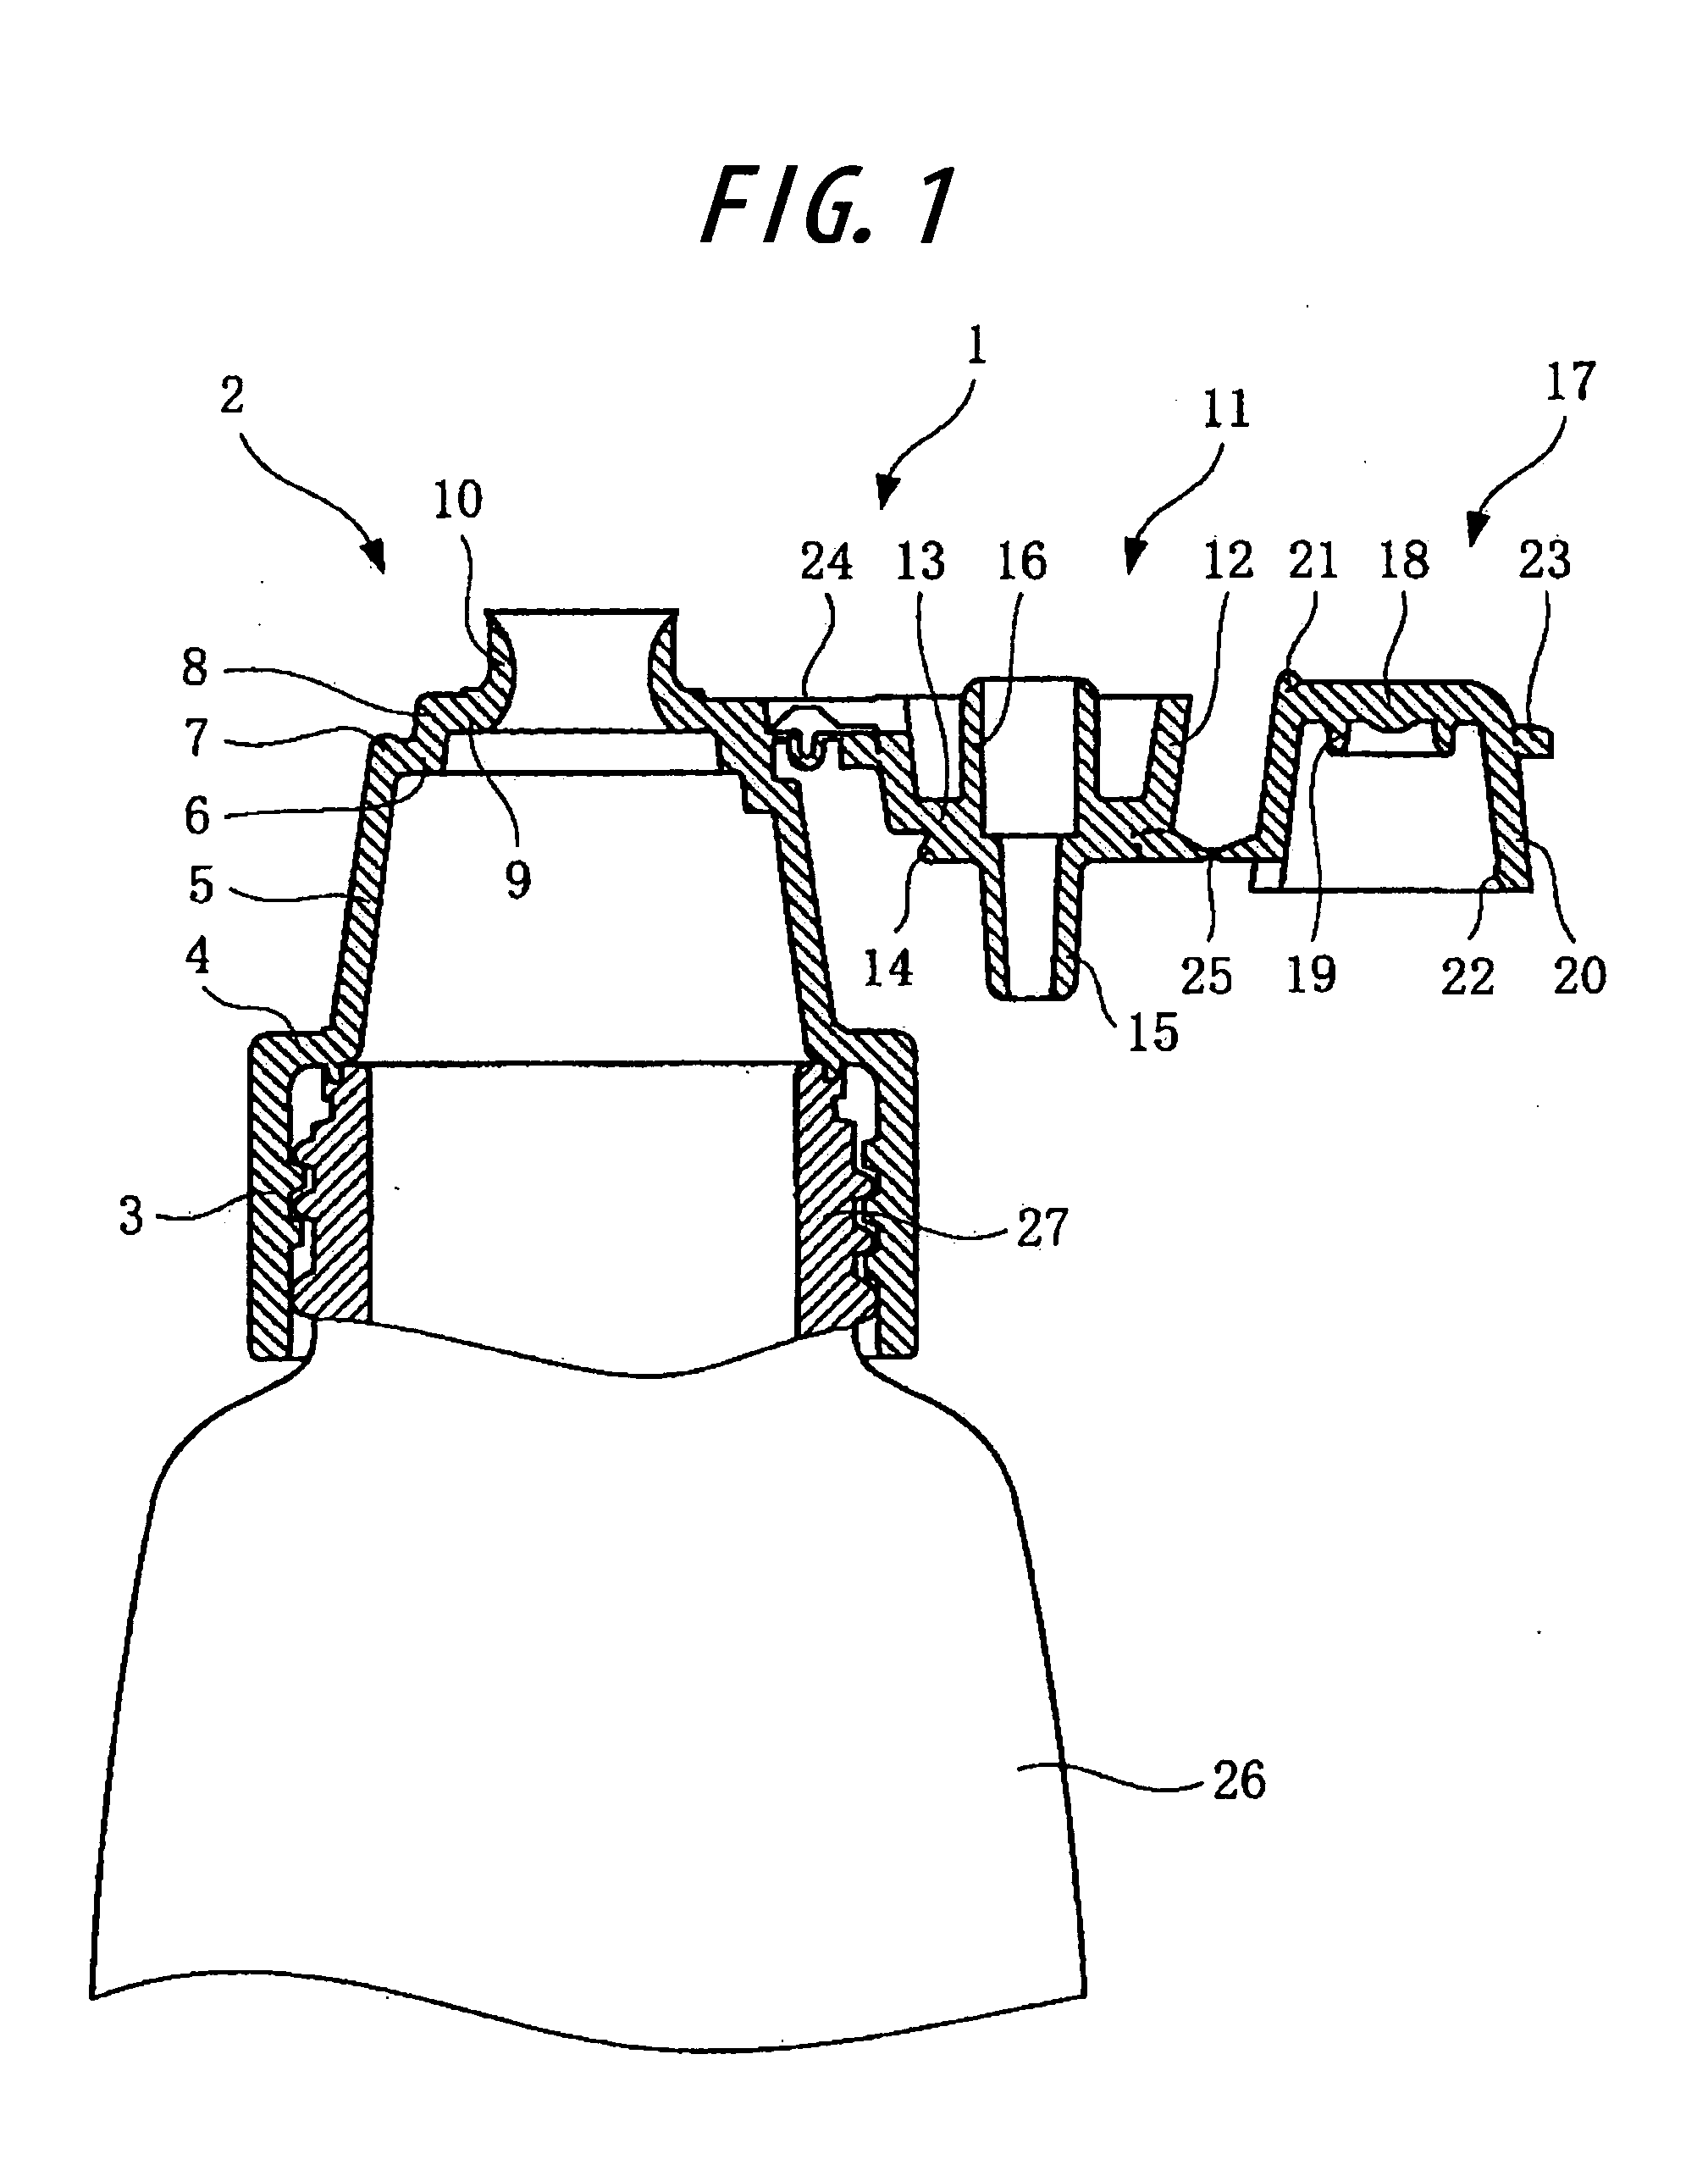 Discharge cap for bottle-like container body